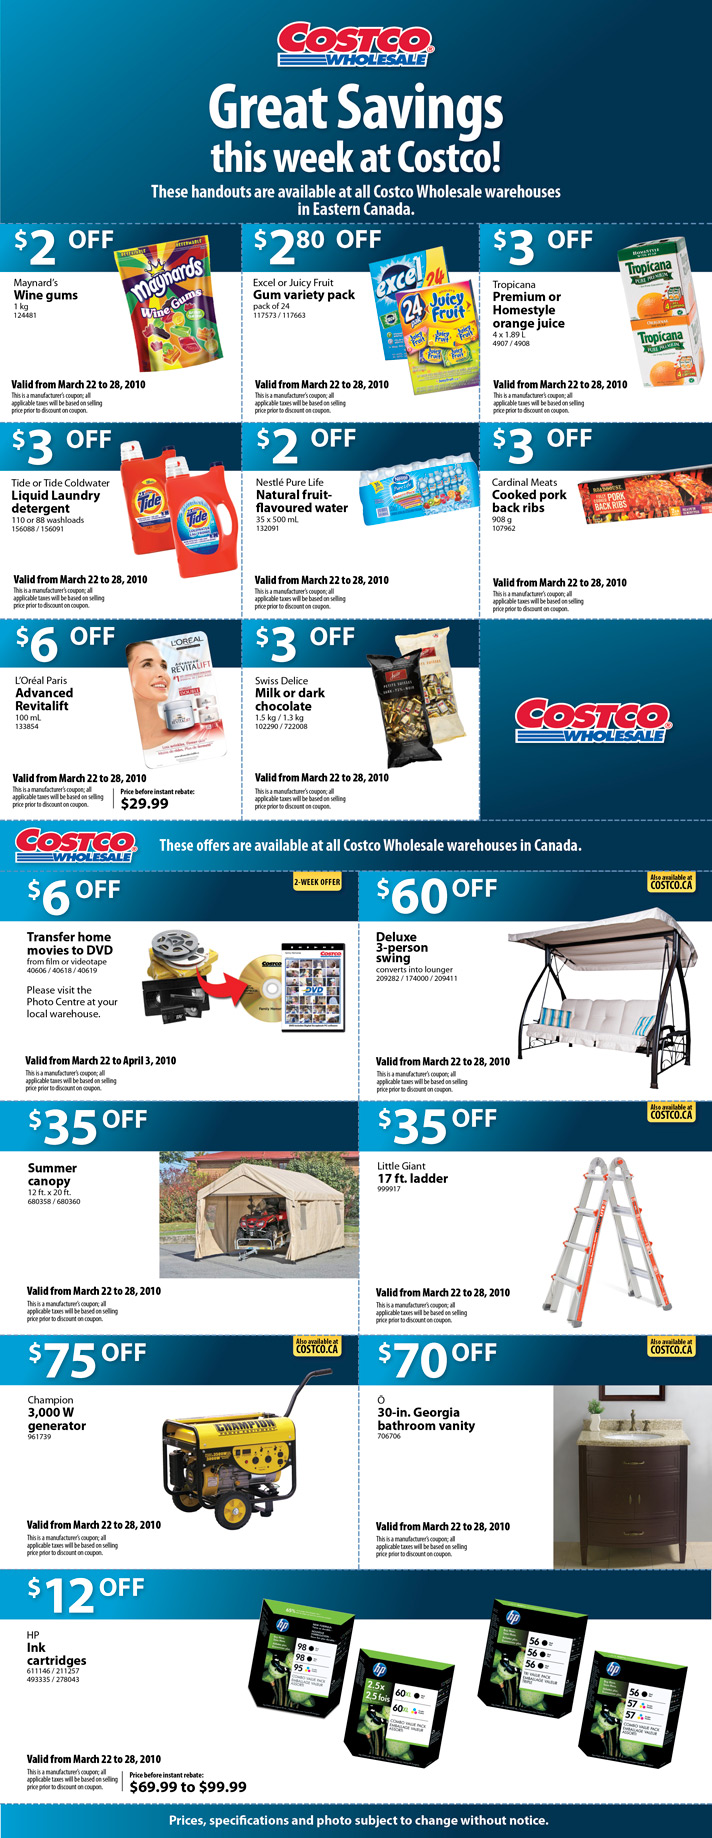 costco-instant-savings-coupons-march-22-28-2010-canadian-freebies